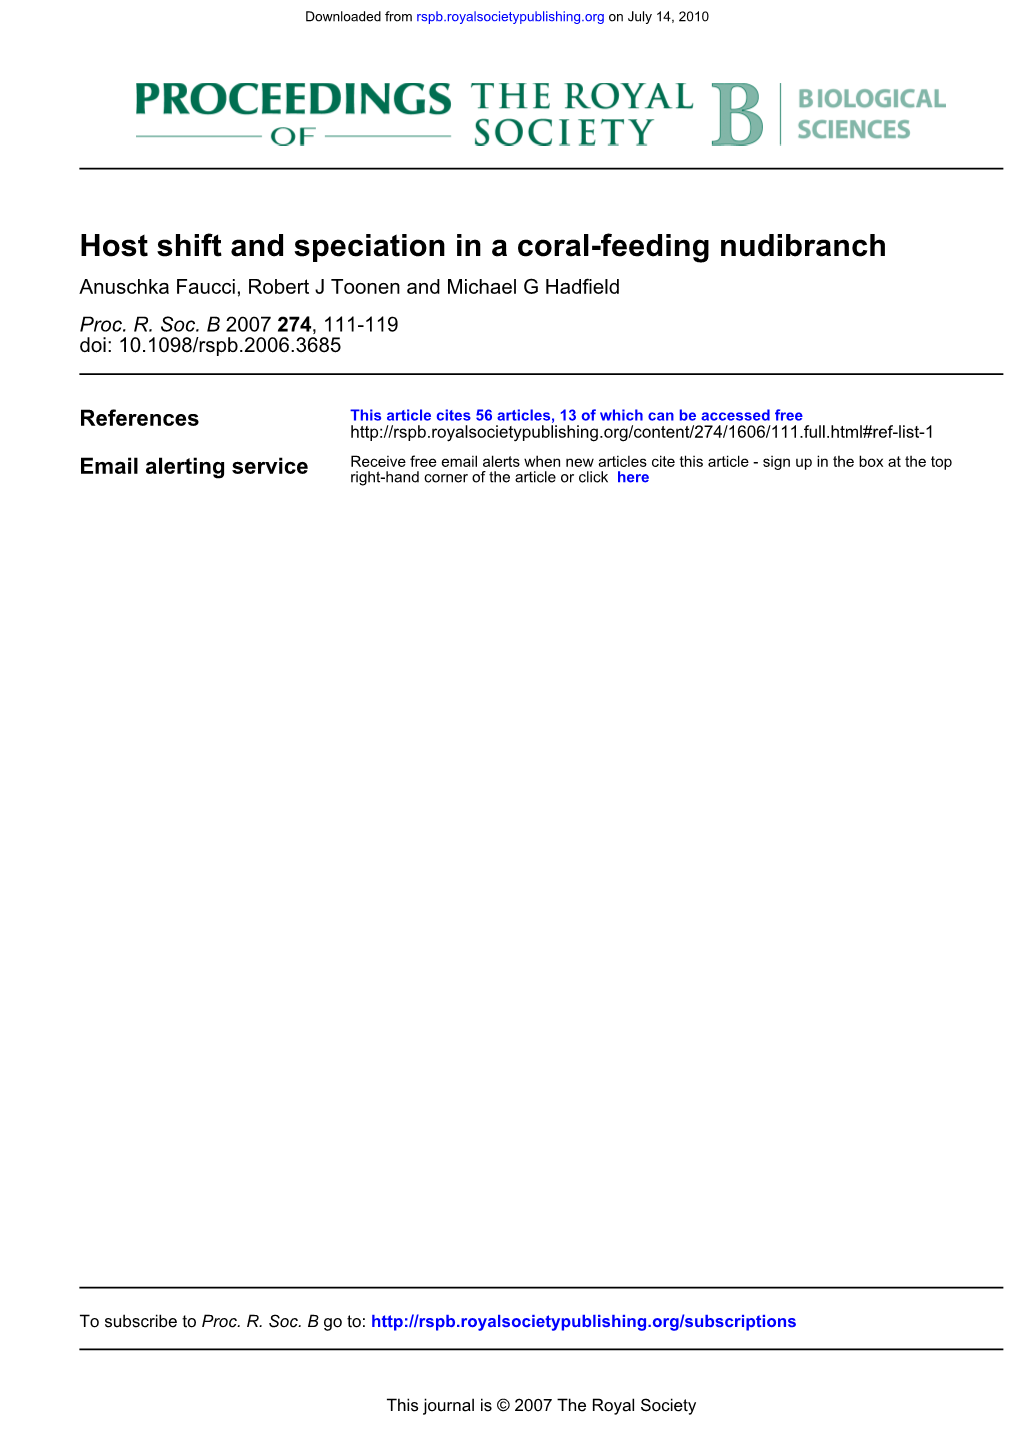 Host Shift and Speciation in a Coral-Feeding Nudibranch